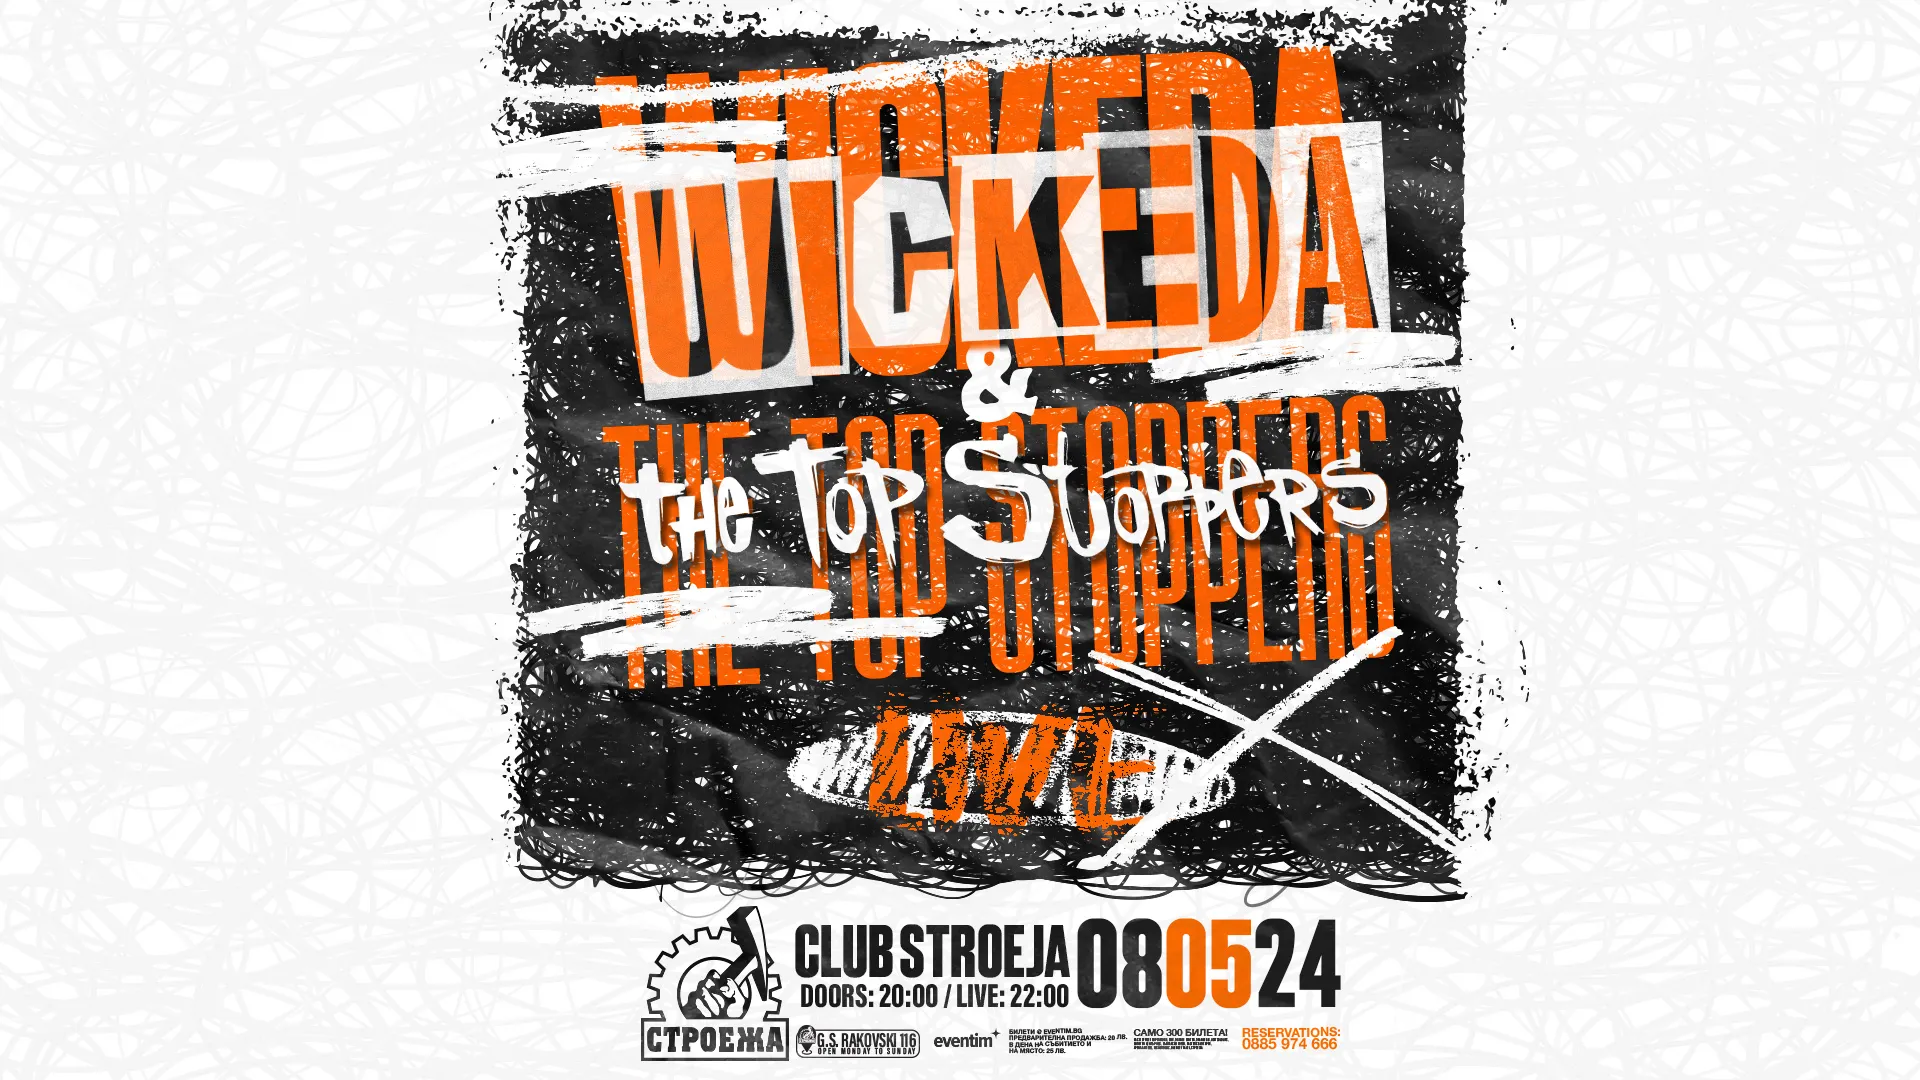 WICKEDA & THE TOP STOPPERS